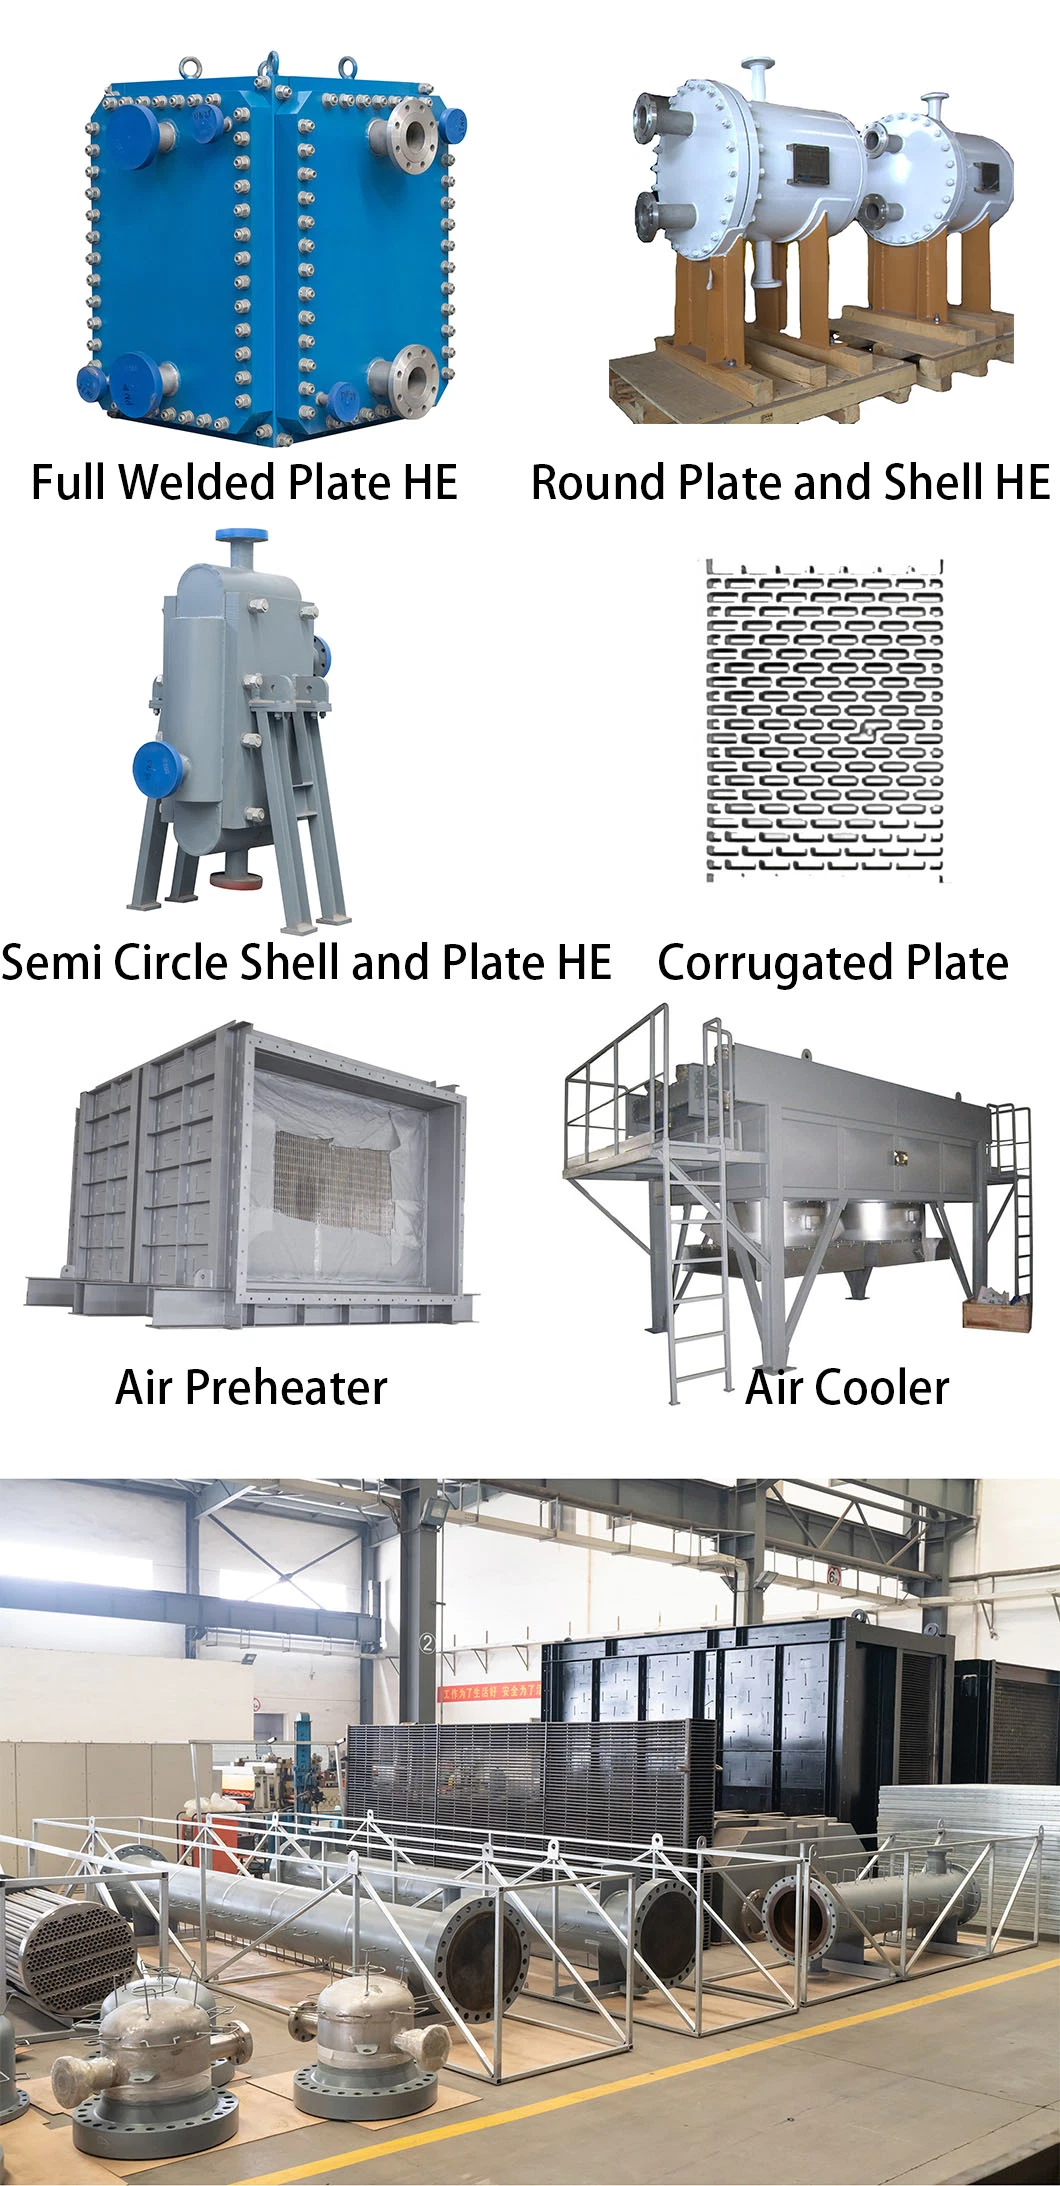 Stainless Steel Round Plate and Shell Heat Exchanger for Harsh Working Condition